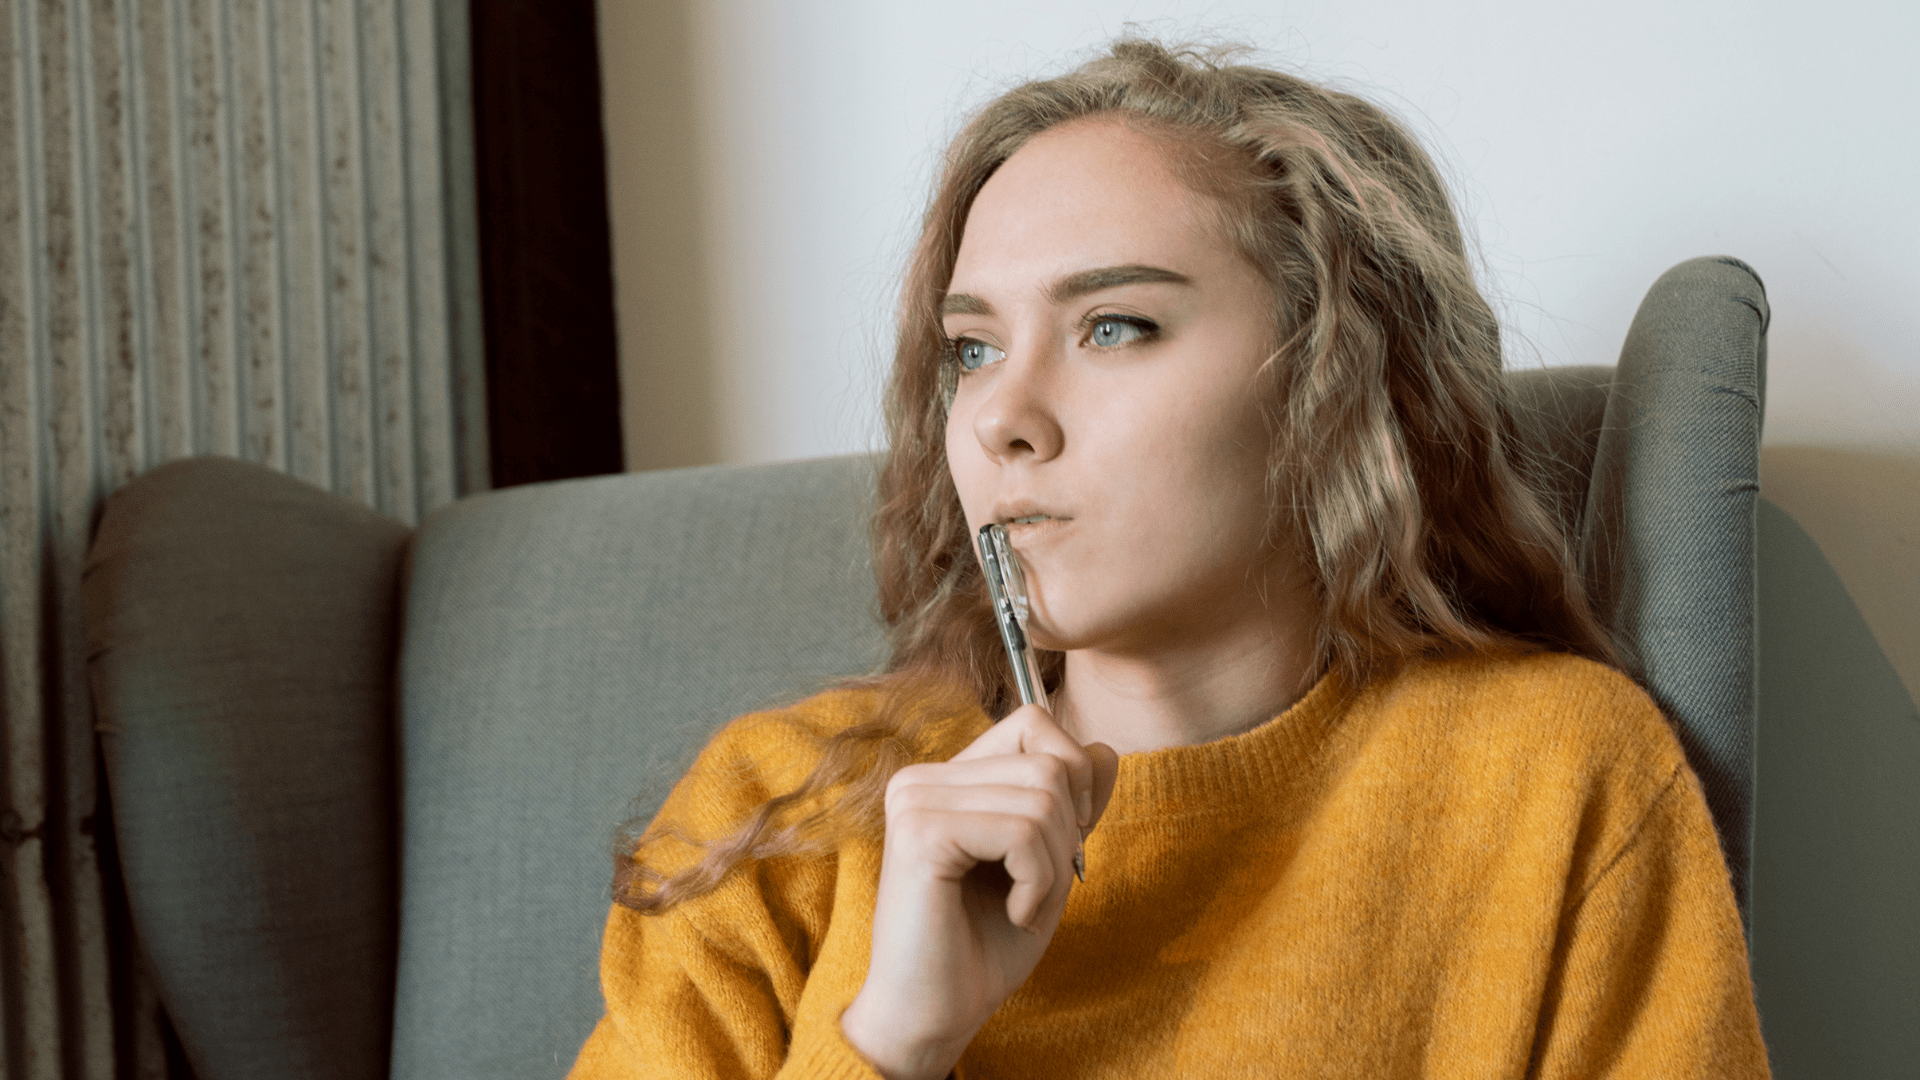 woman with orange sweater thinking holding a pen to her mouth